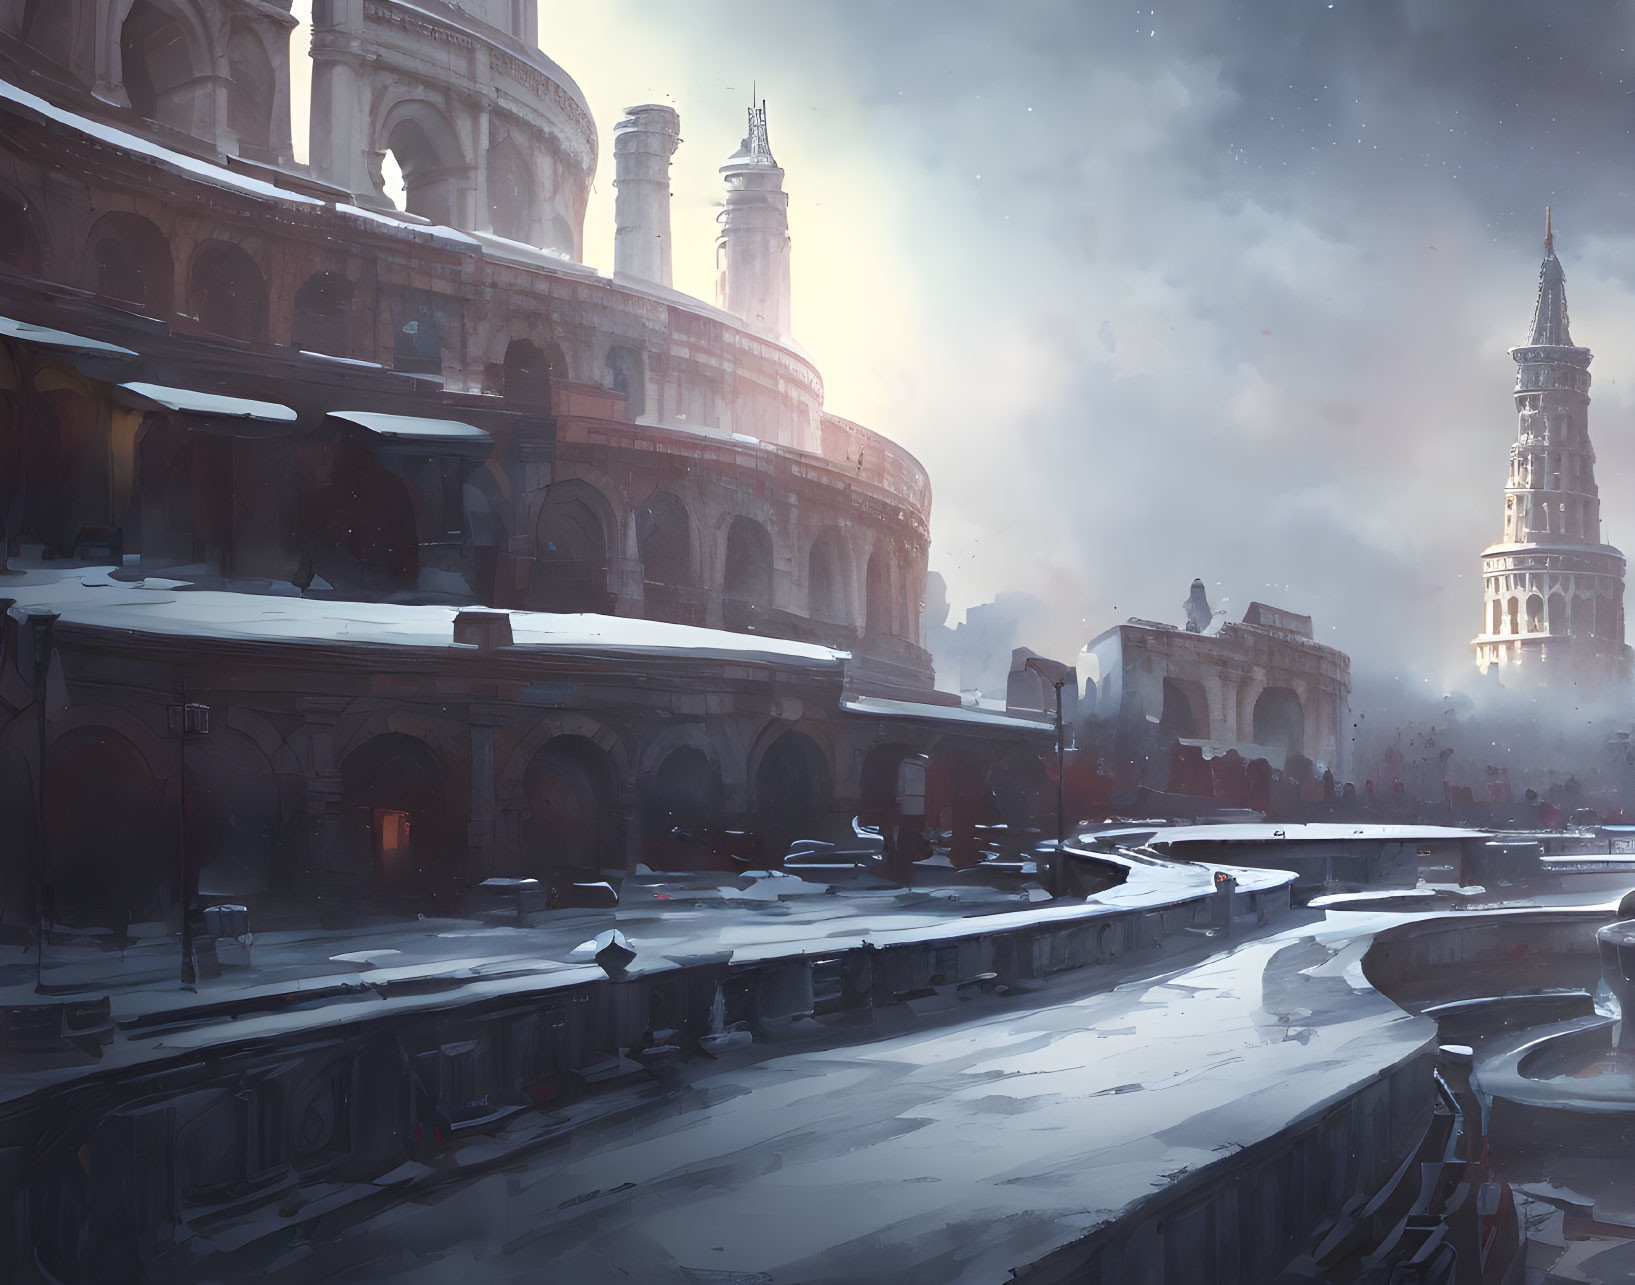 Snowy futuristic cityscape with classical architecture and coliseum-like structure and towering spire.